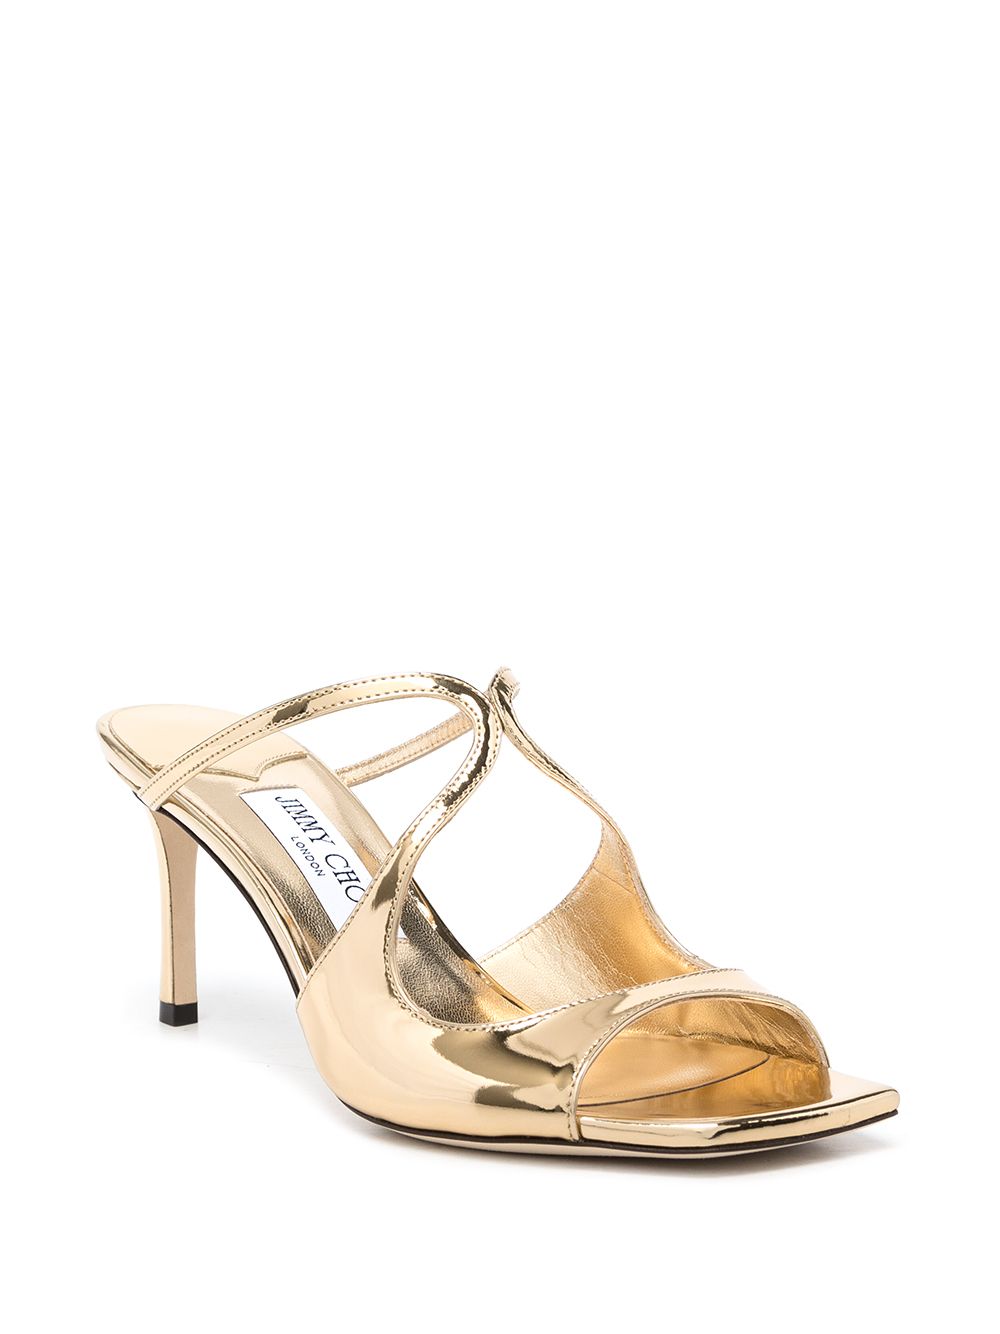 Jimmy Choo Anise 75mm heeled sandals Gold